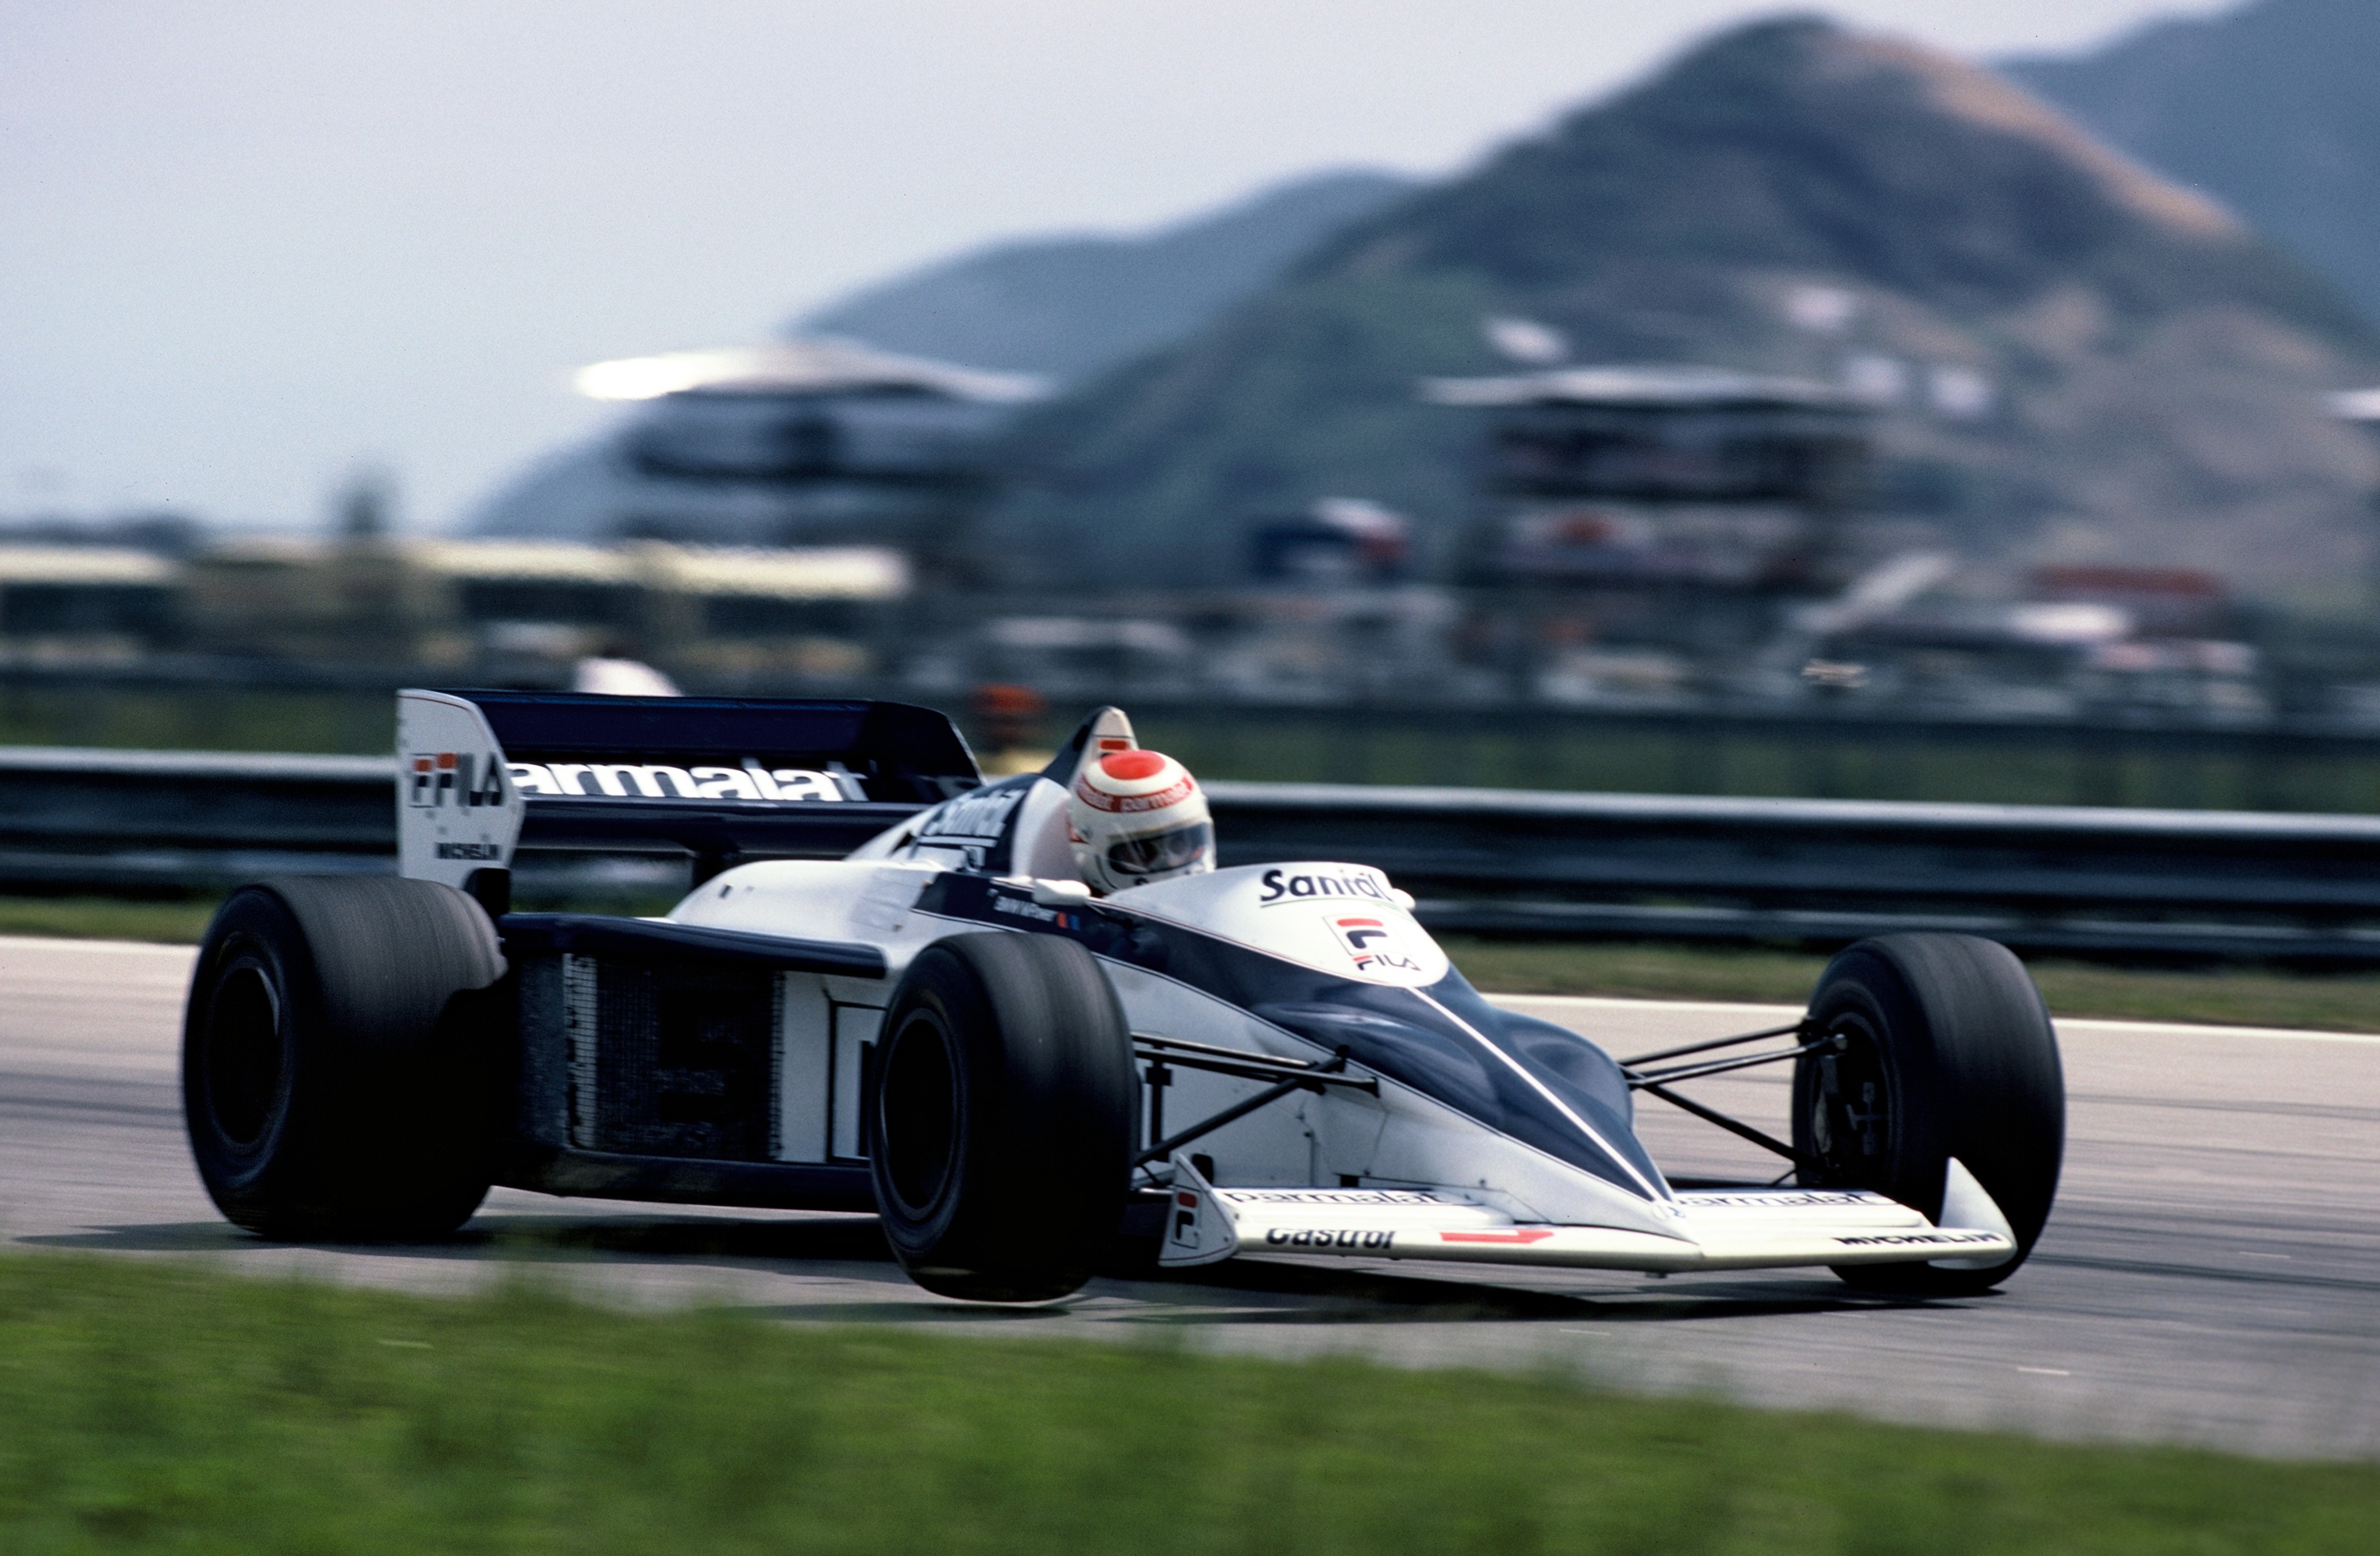 Nelson Piquet Was Reunited with His 1,400 HP BMW Brabham BT52 at the